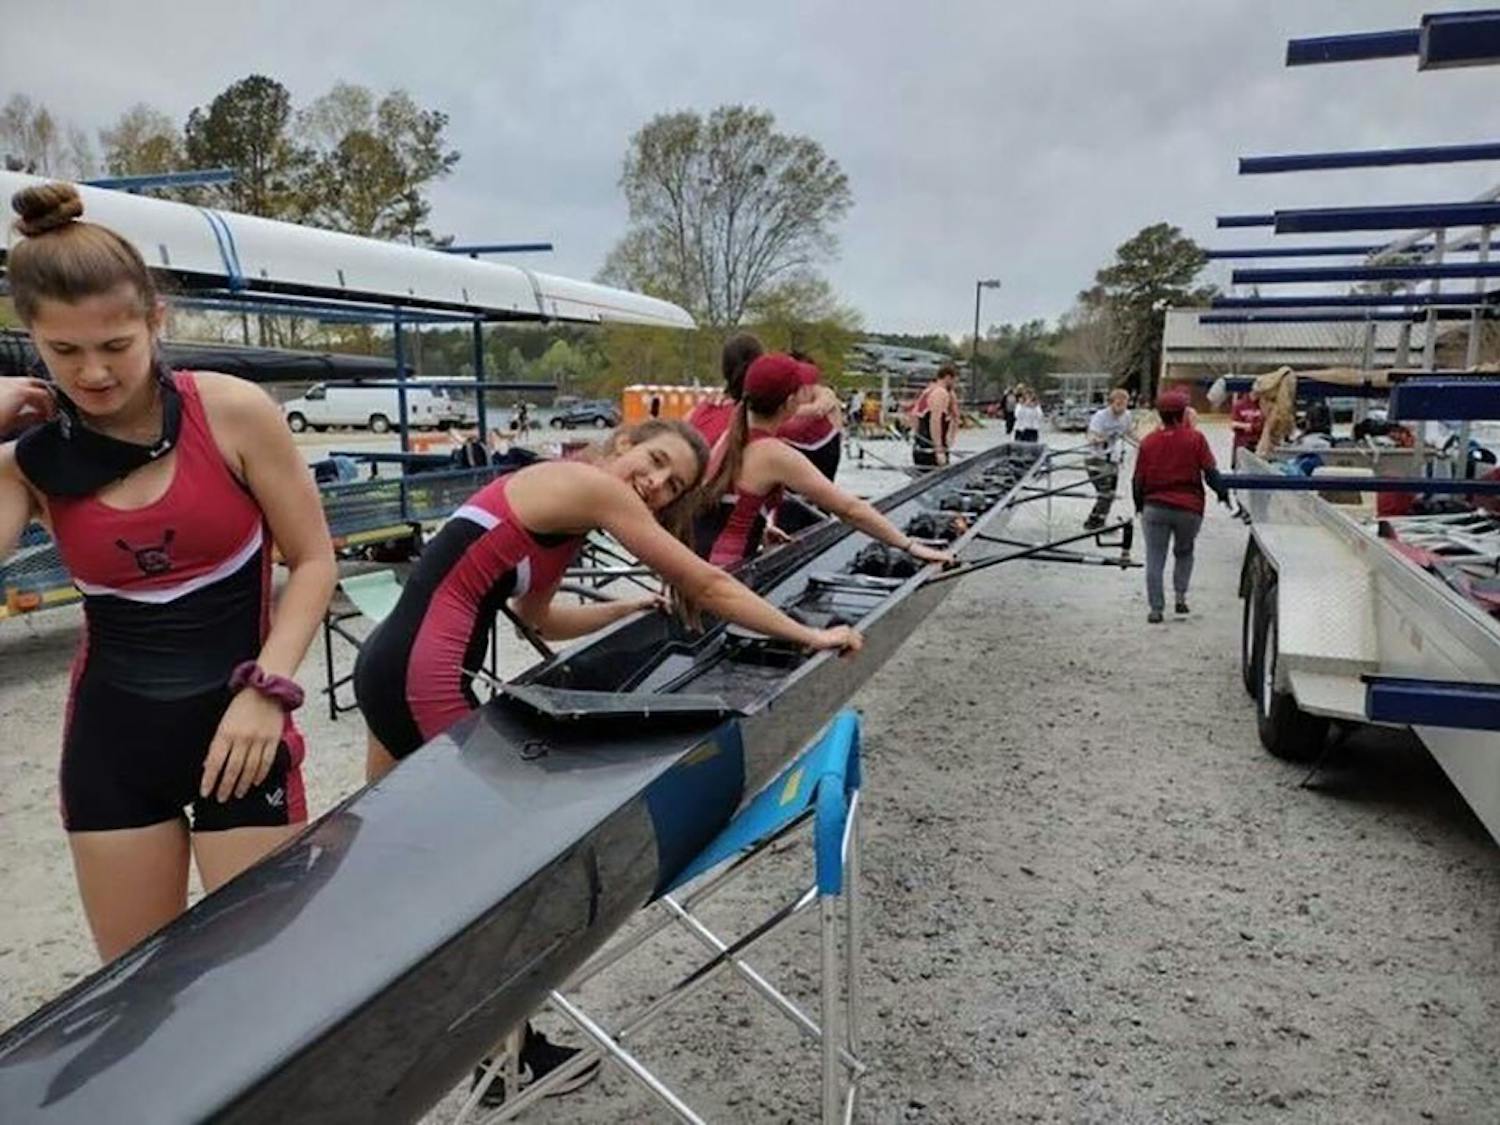 Junior Hannah Skerkis, senior Gabby Ricche, and freshman Alex Defalco preparing their boat for the Women's Novice Four. The Gamecock Rowing Club took to the water at the Clemson Regatta in Clemson, S.C. on April 1, 2022.